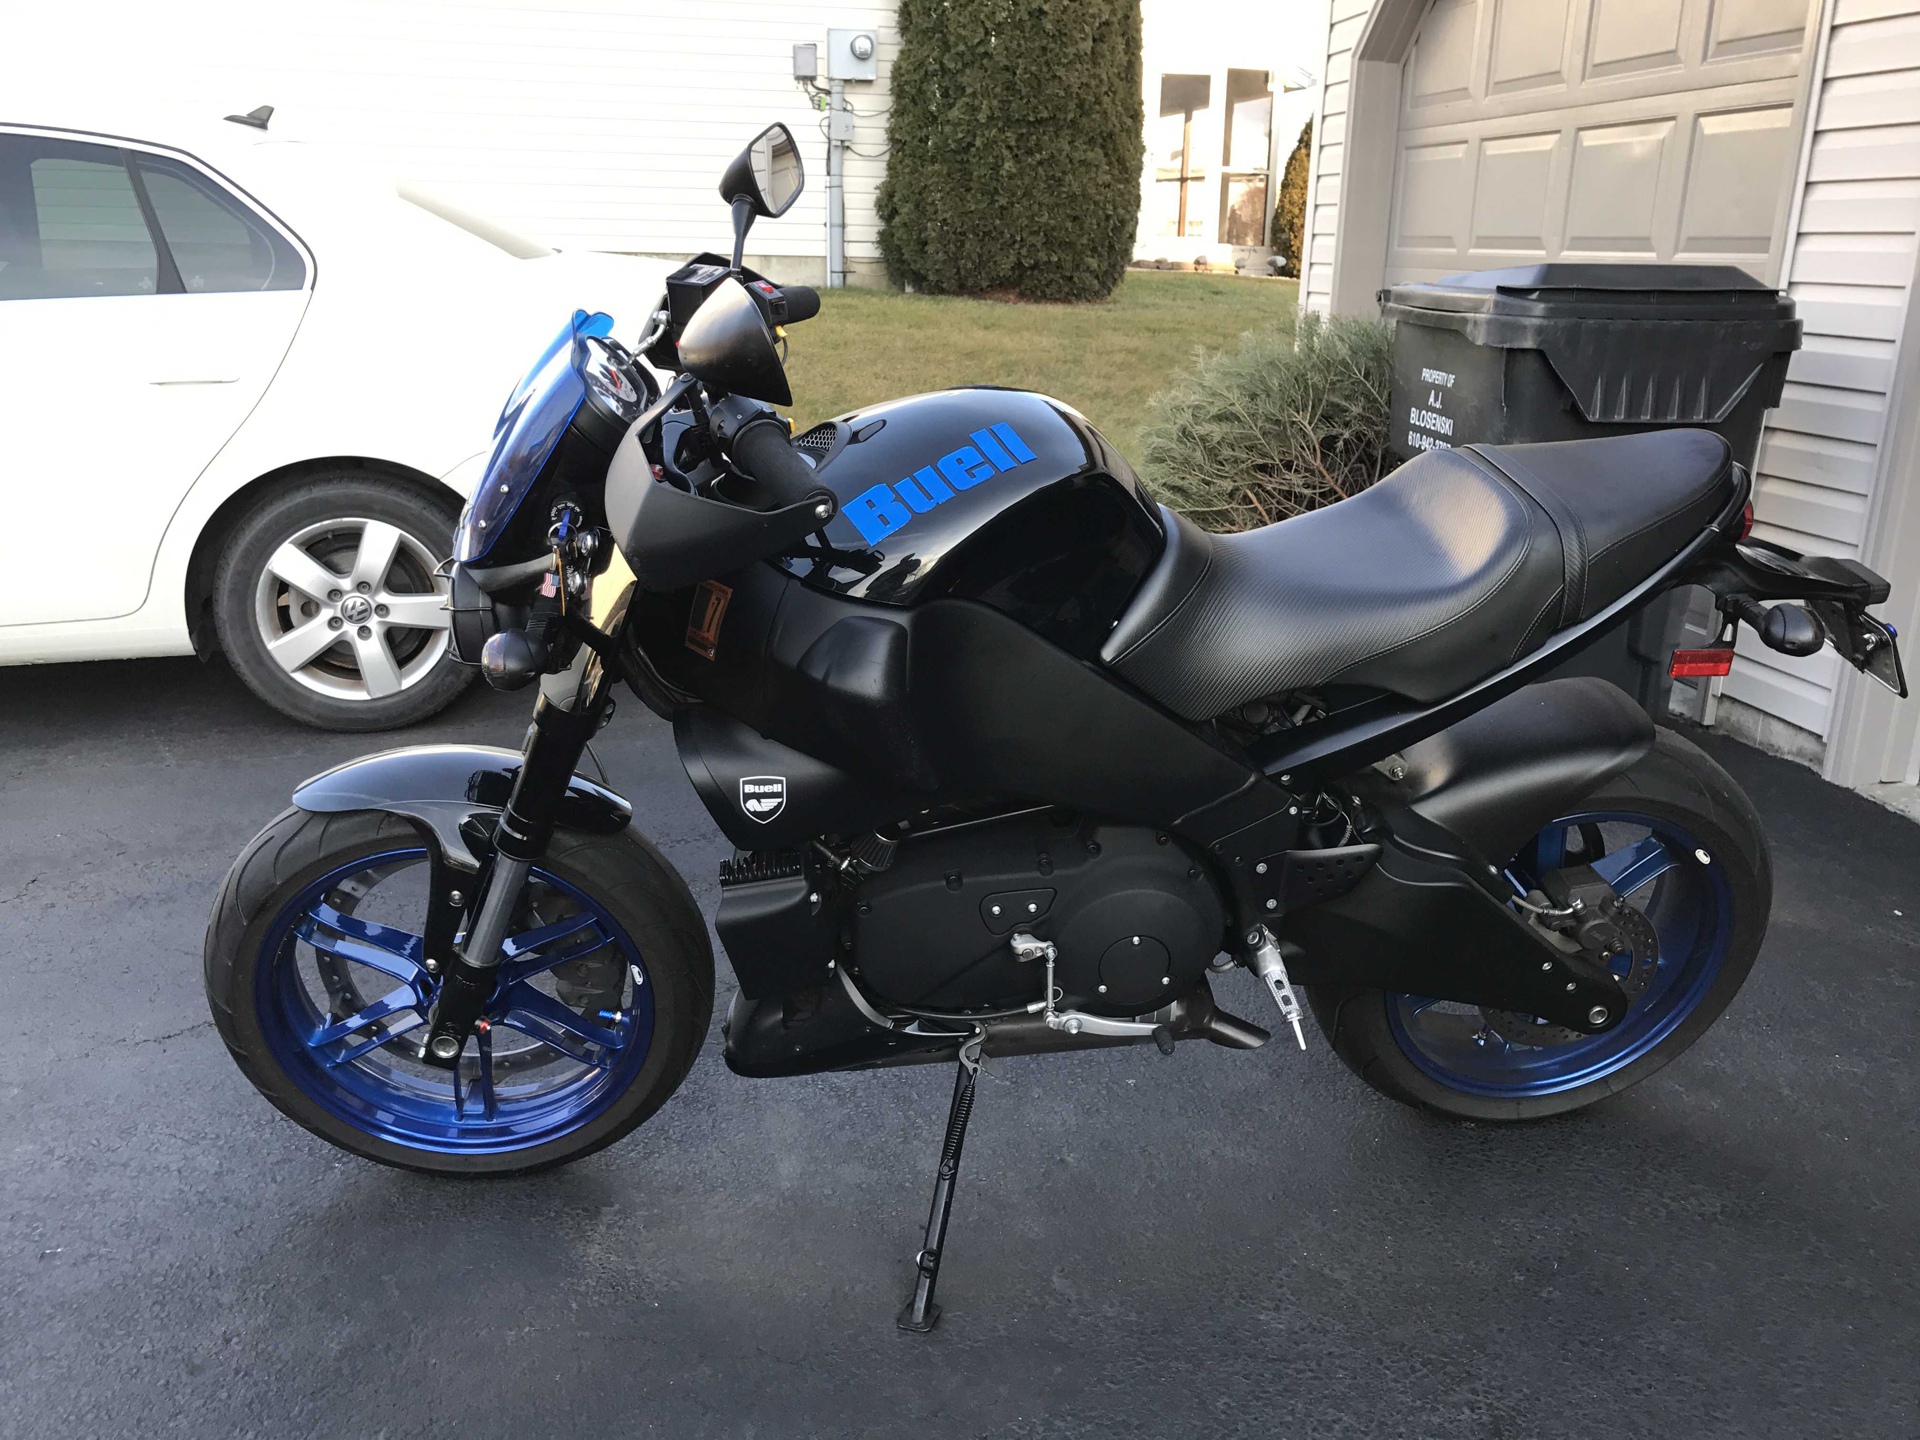 2009 Buell XB12Ss in Black and Blue